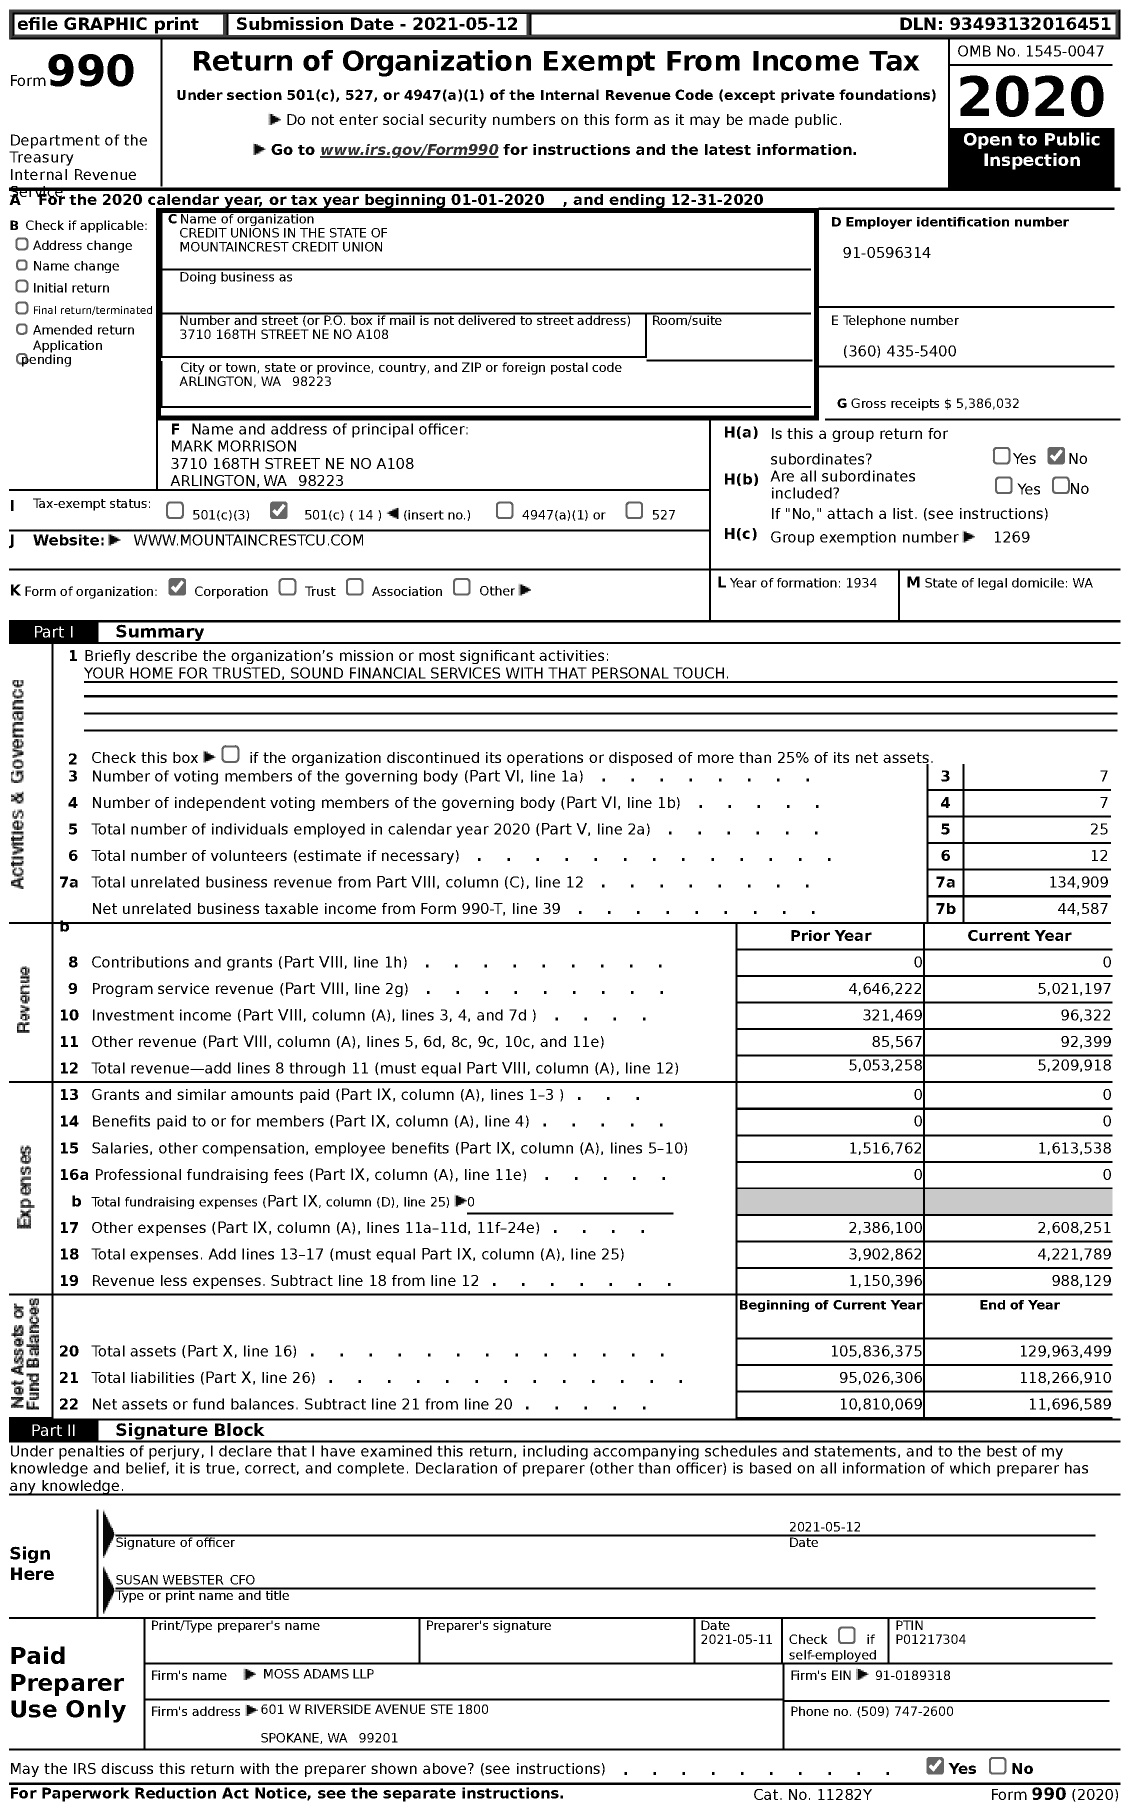 Image of first page of 2020 Form 990 for Credit Unions in the State of MountainCrest Credit Union